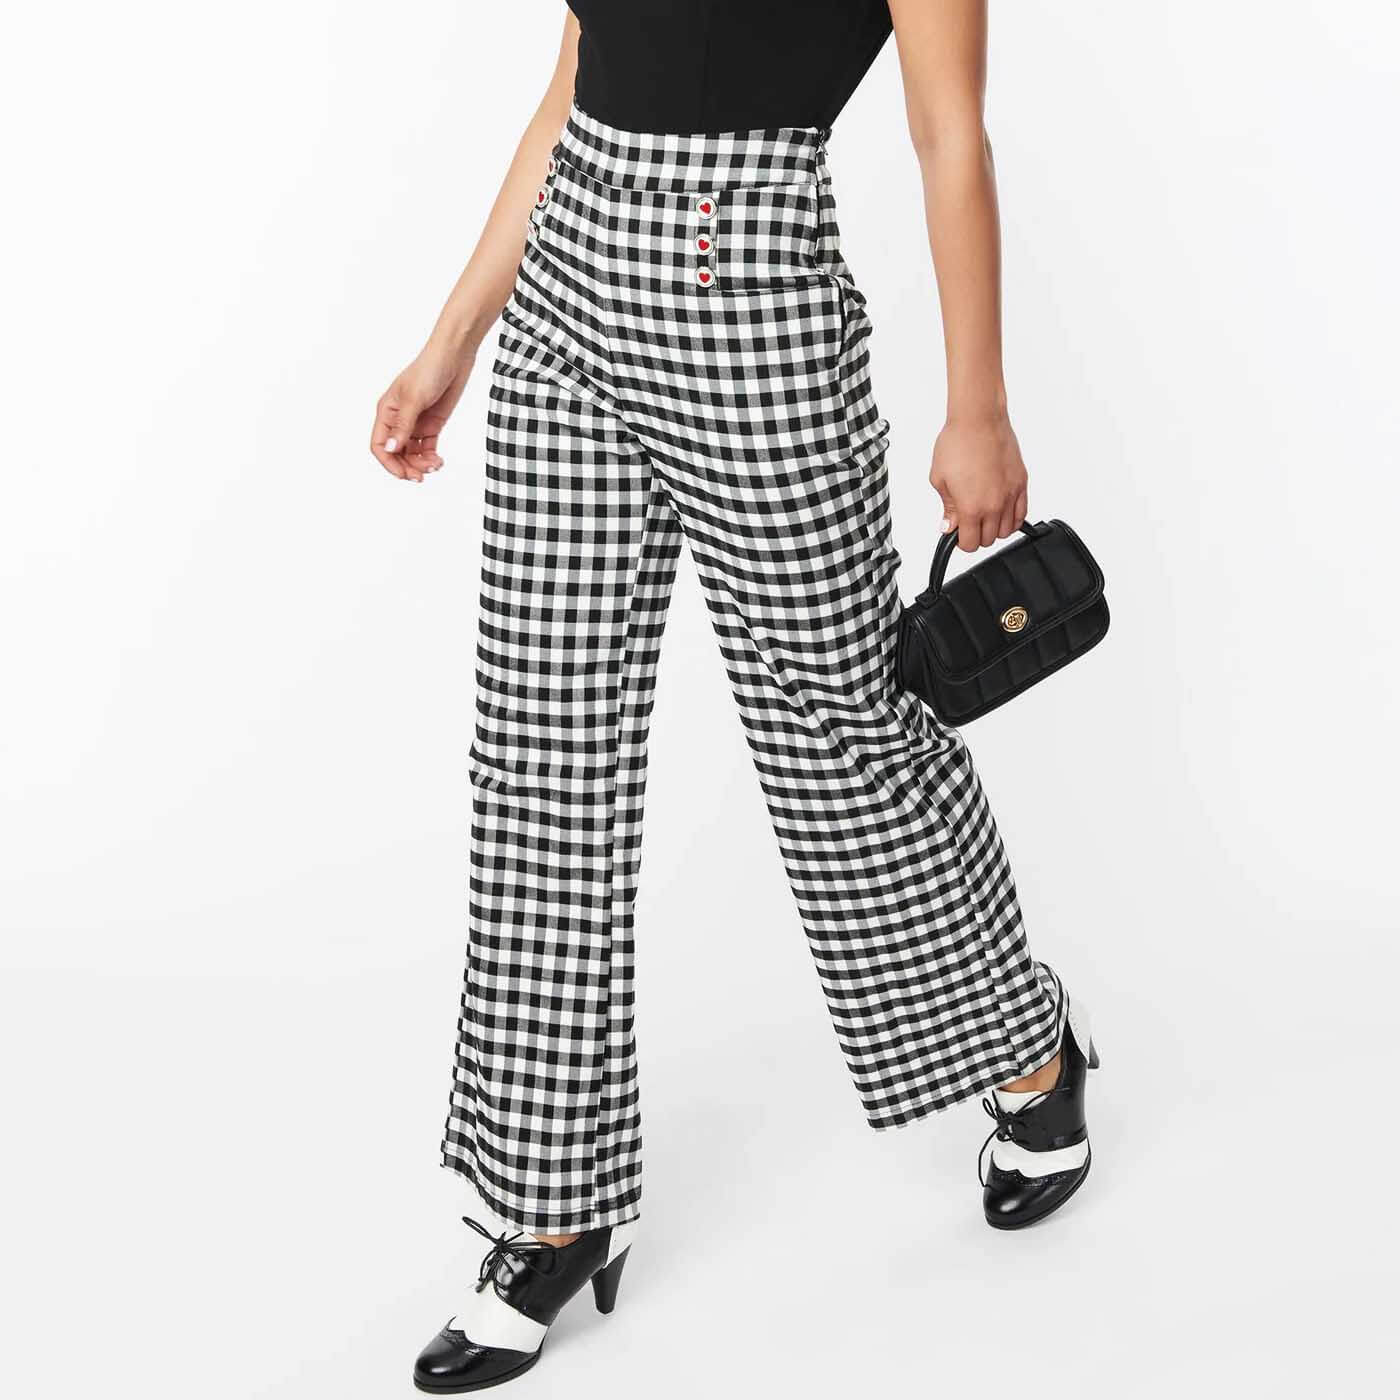 Model wearing Hiht waisted black and white gingham 1950s style  trousers  